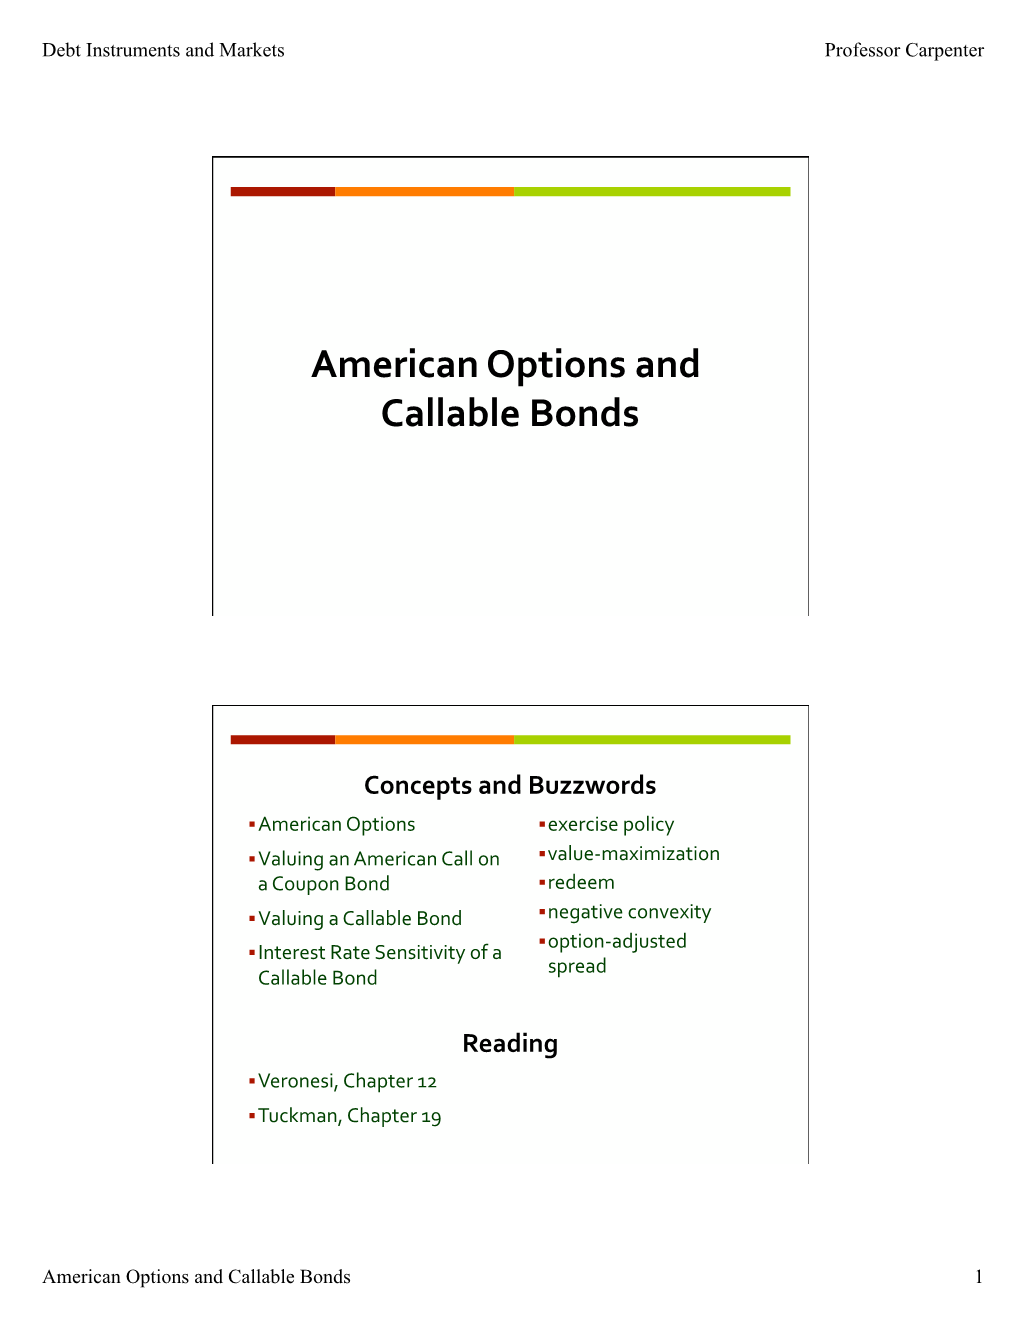 American Options and Callable Bonds